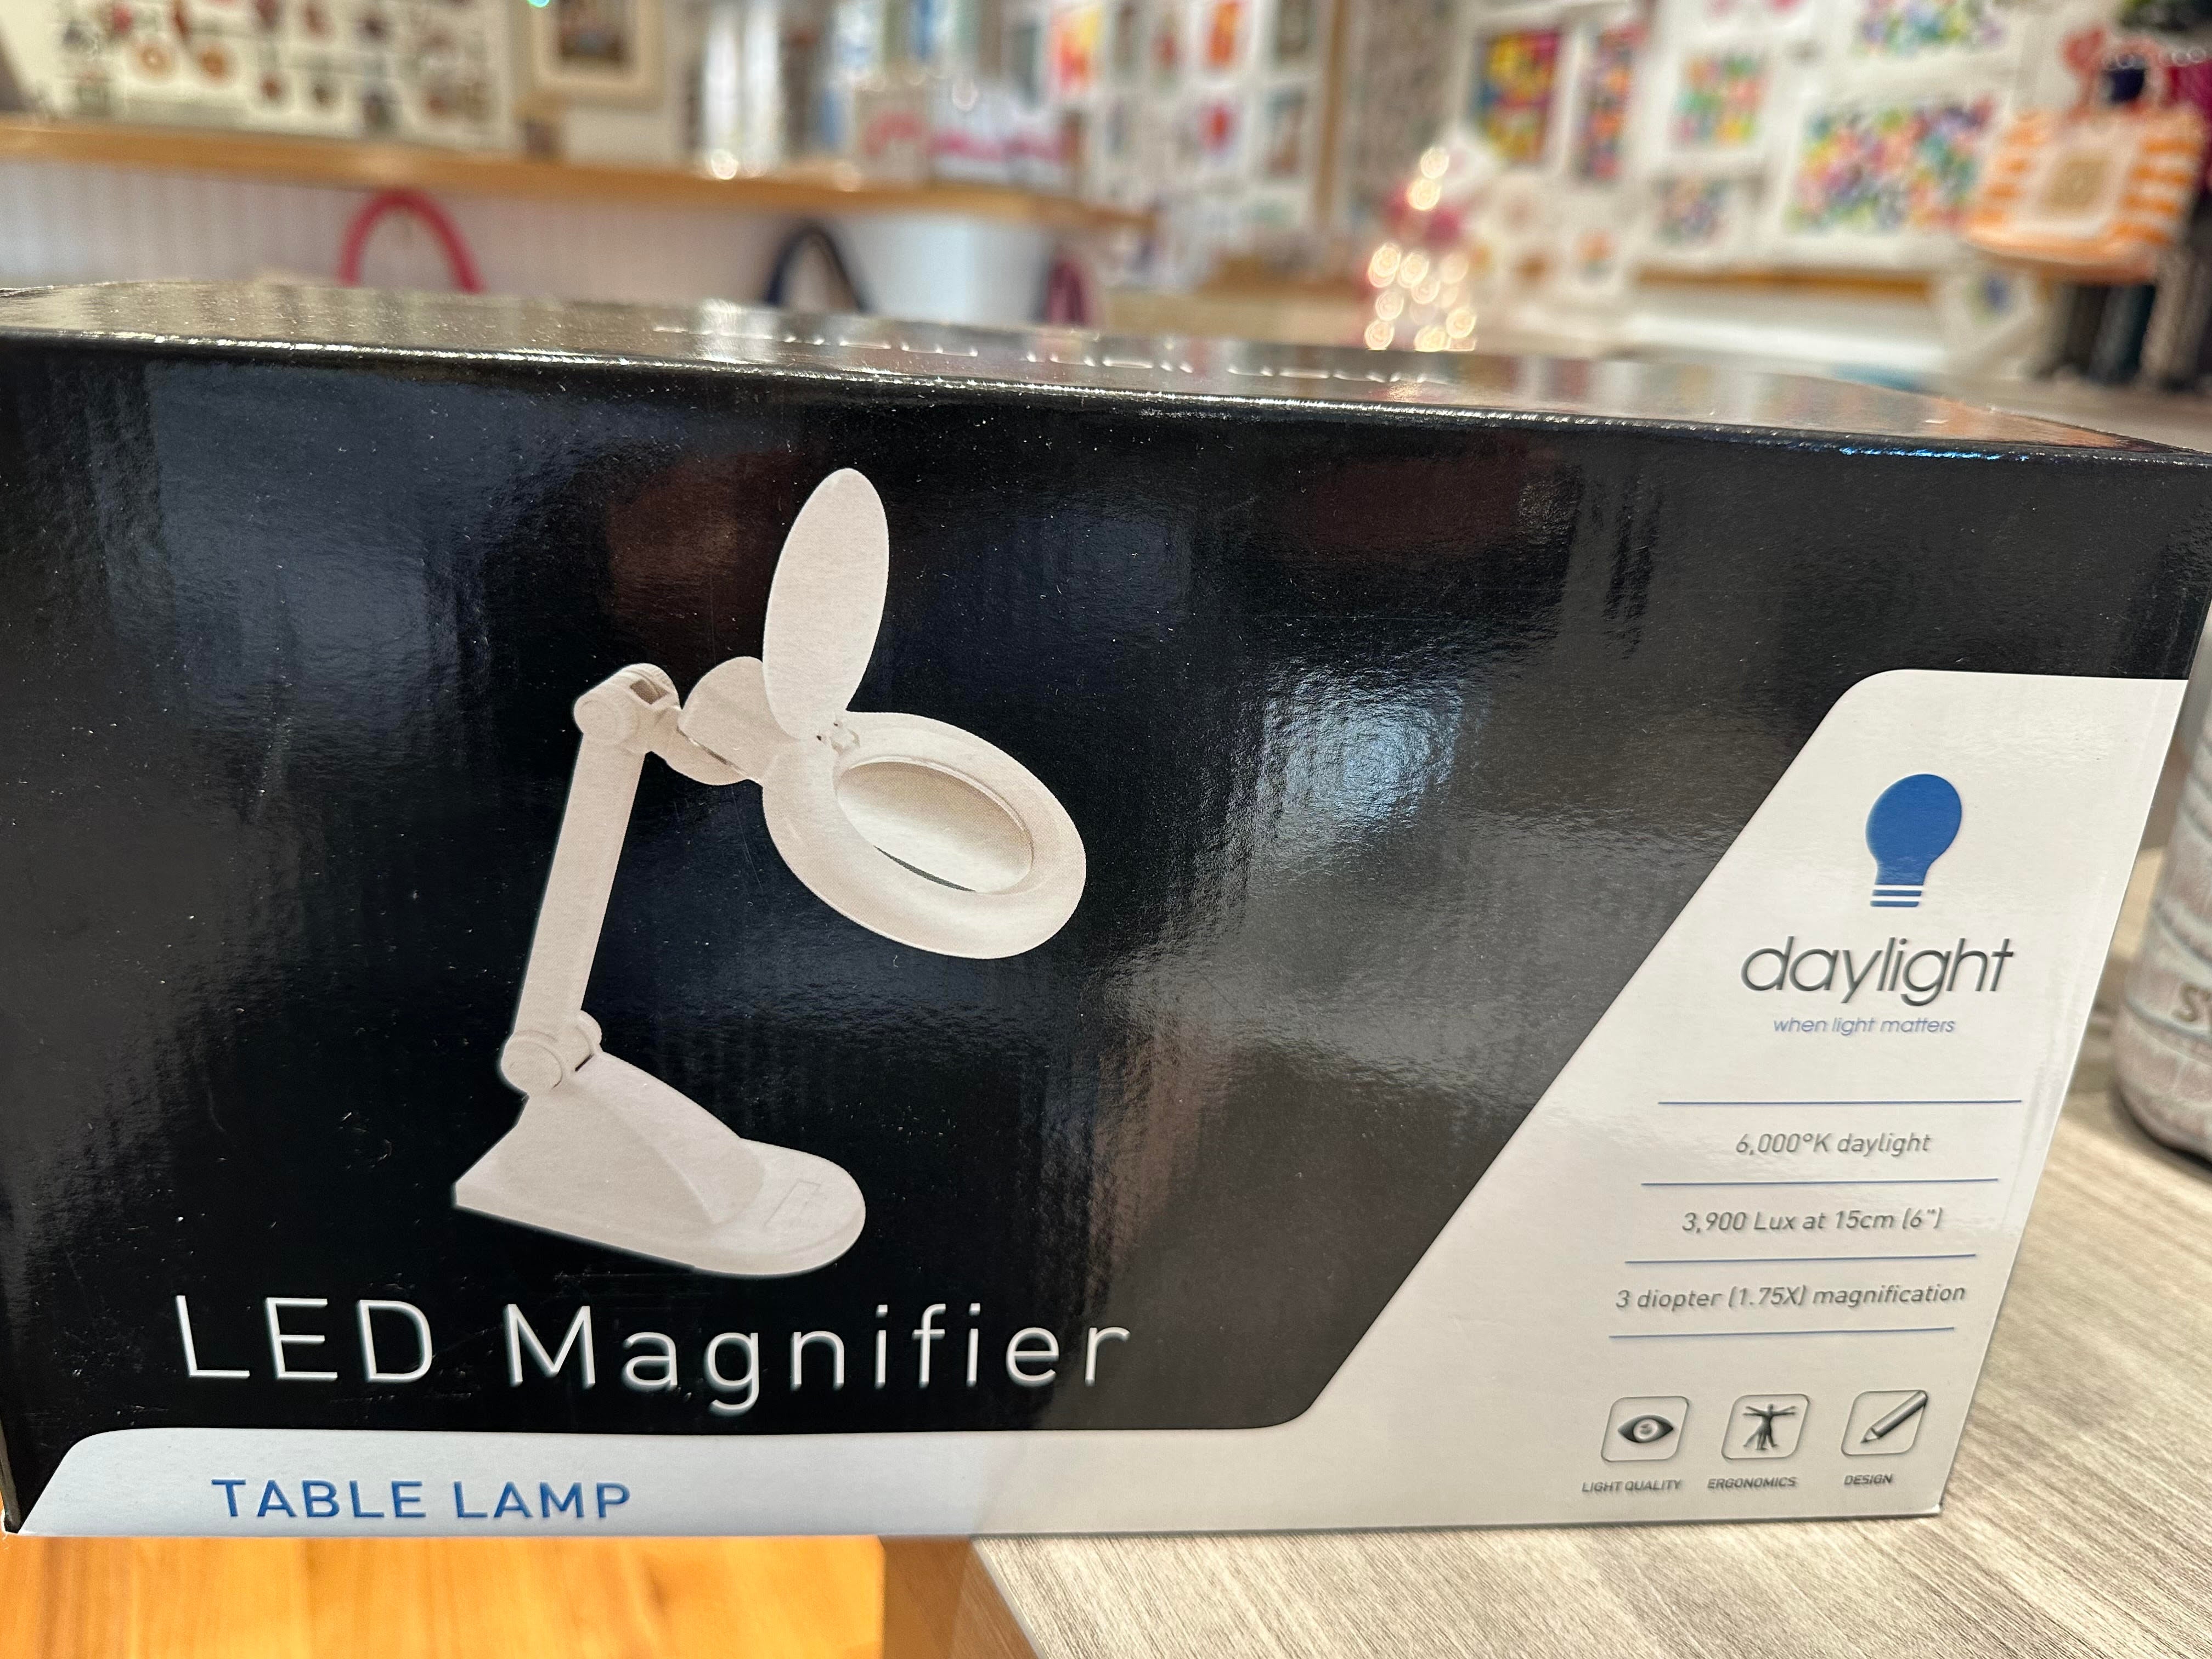 Daylight LED Magnifier - Table Lamp